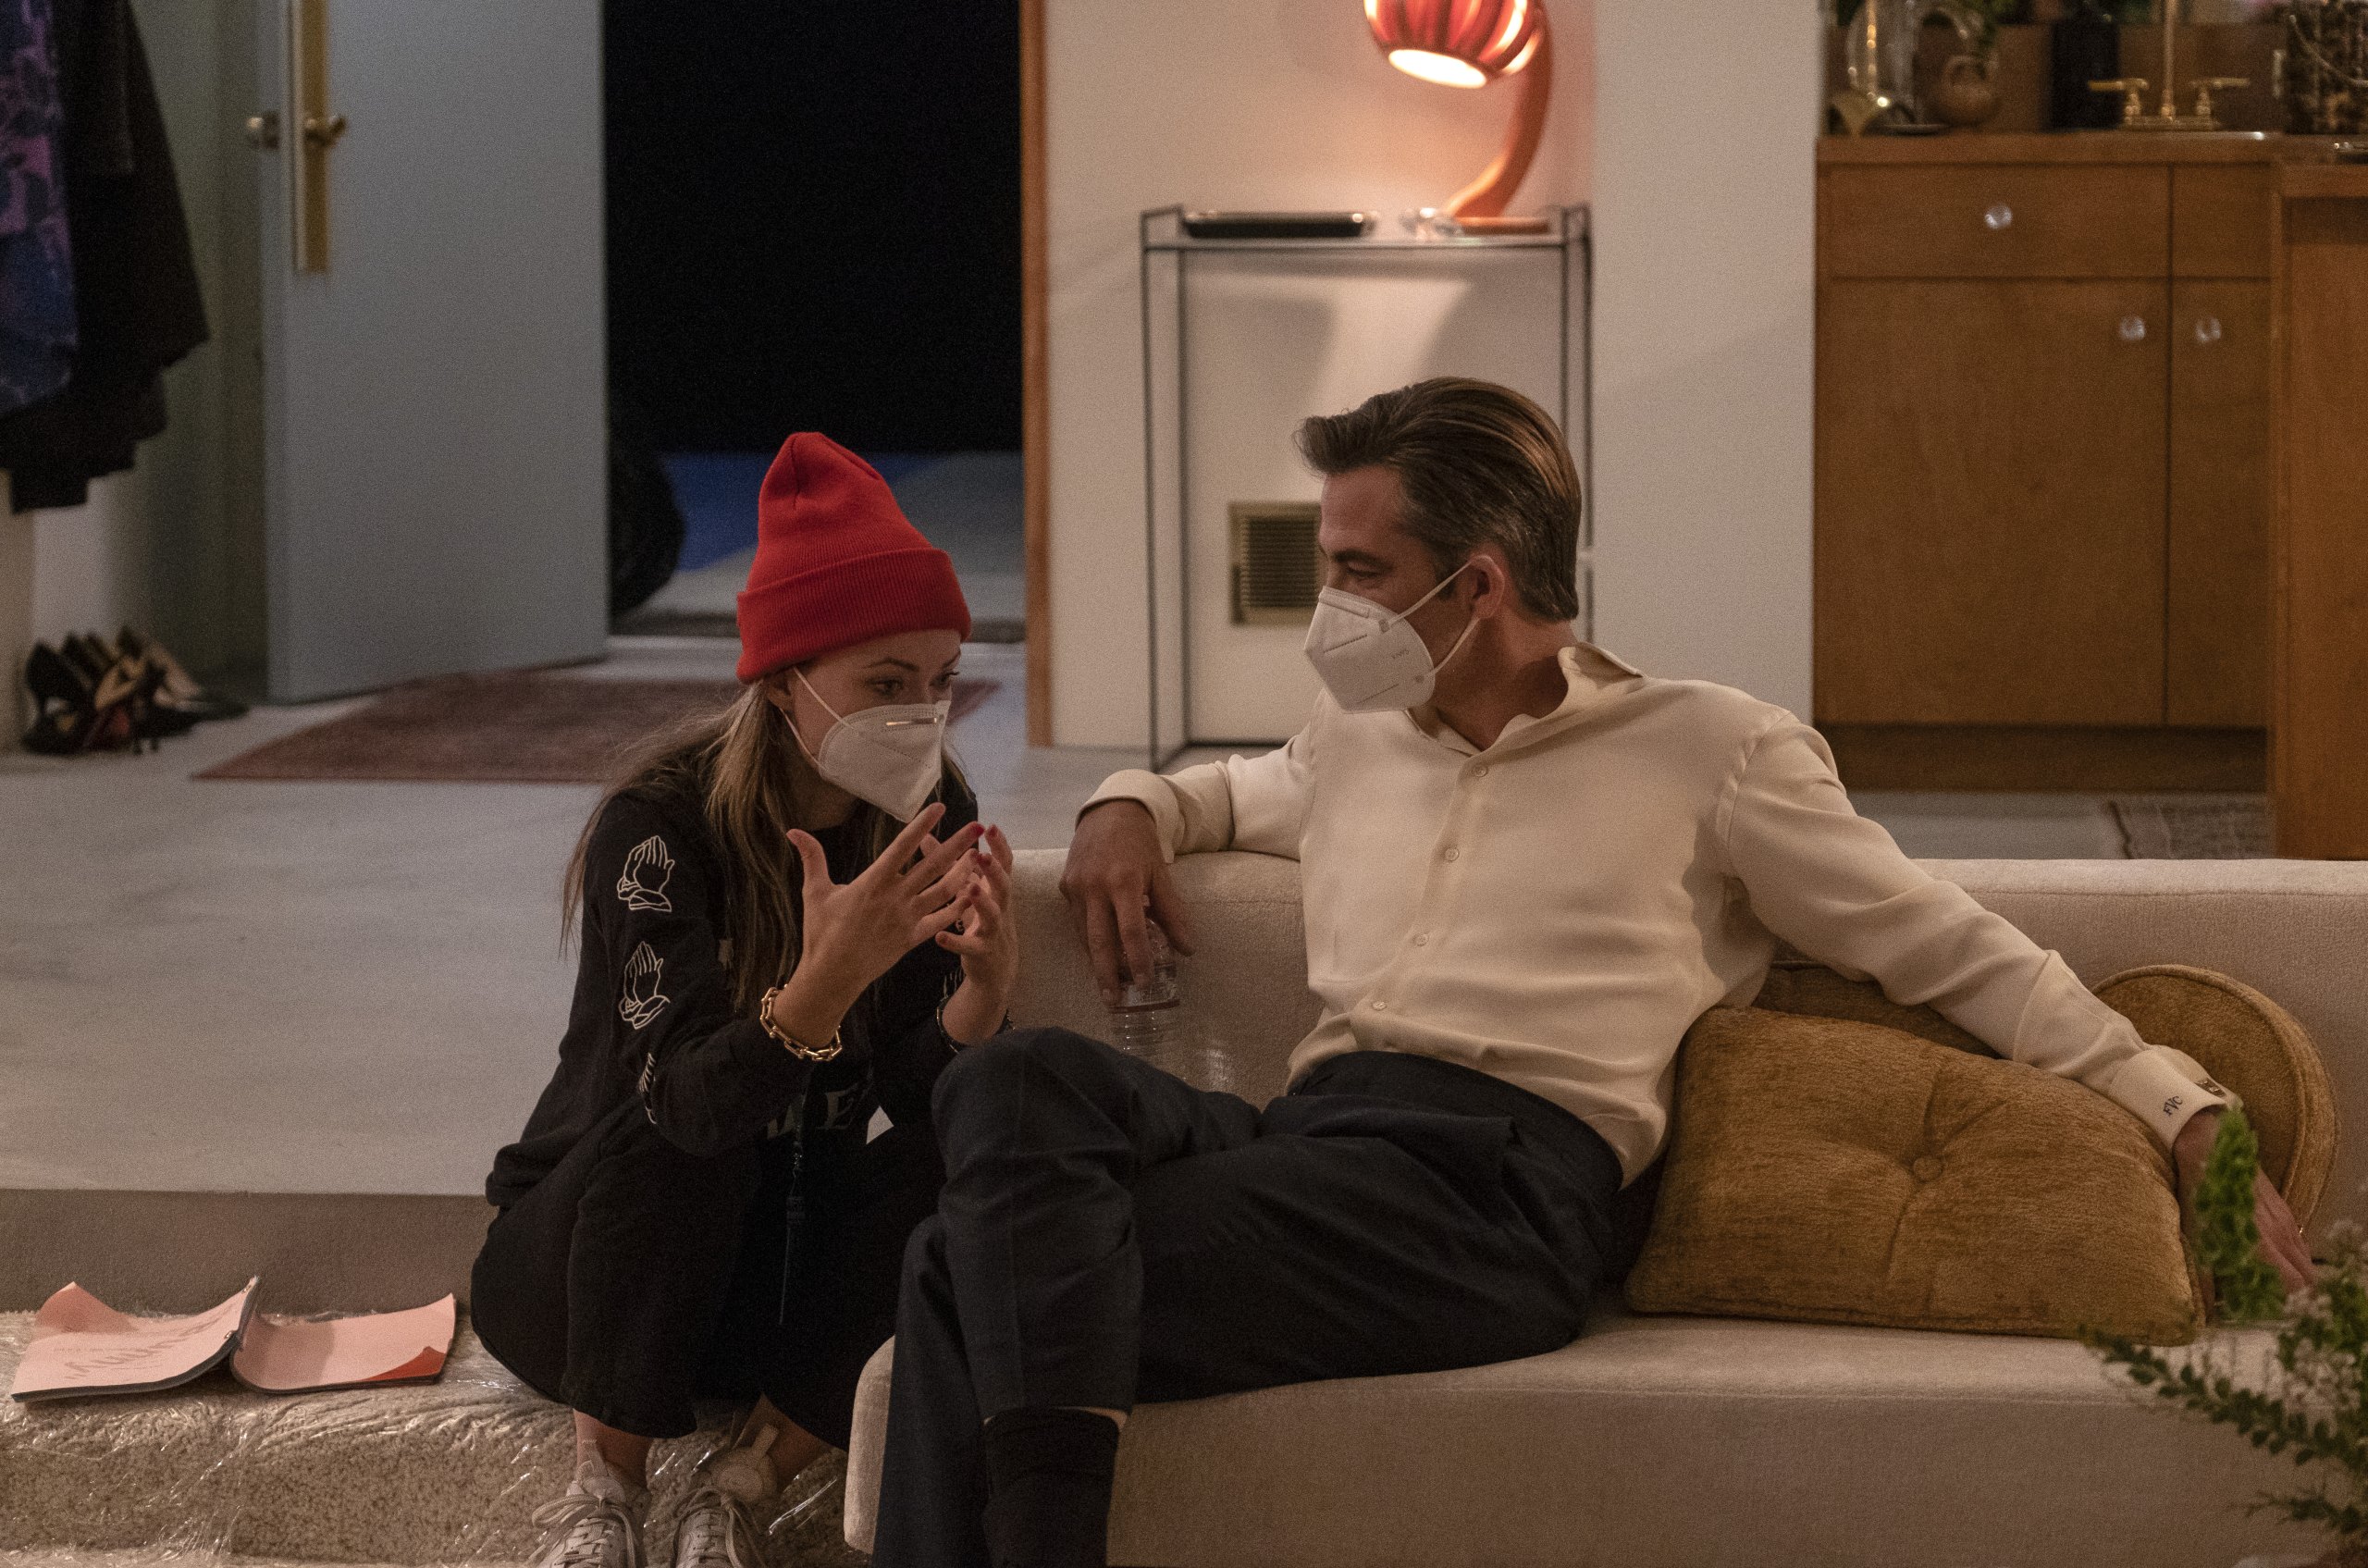 Director, Producer and Actress Olivia Wilde and Chris Pine on the Set of Don't Worry Honey